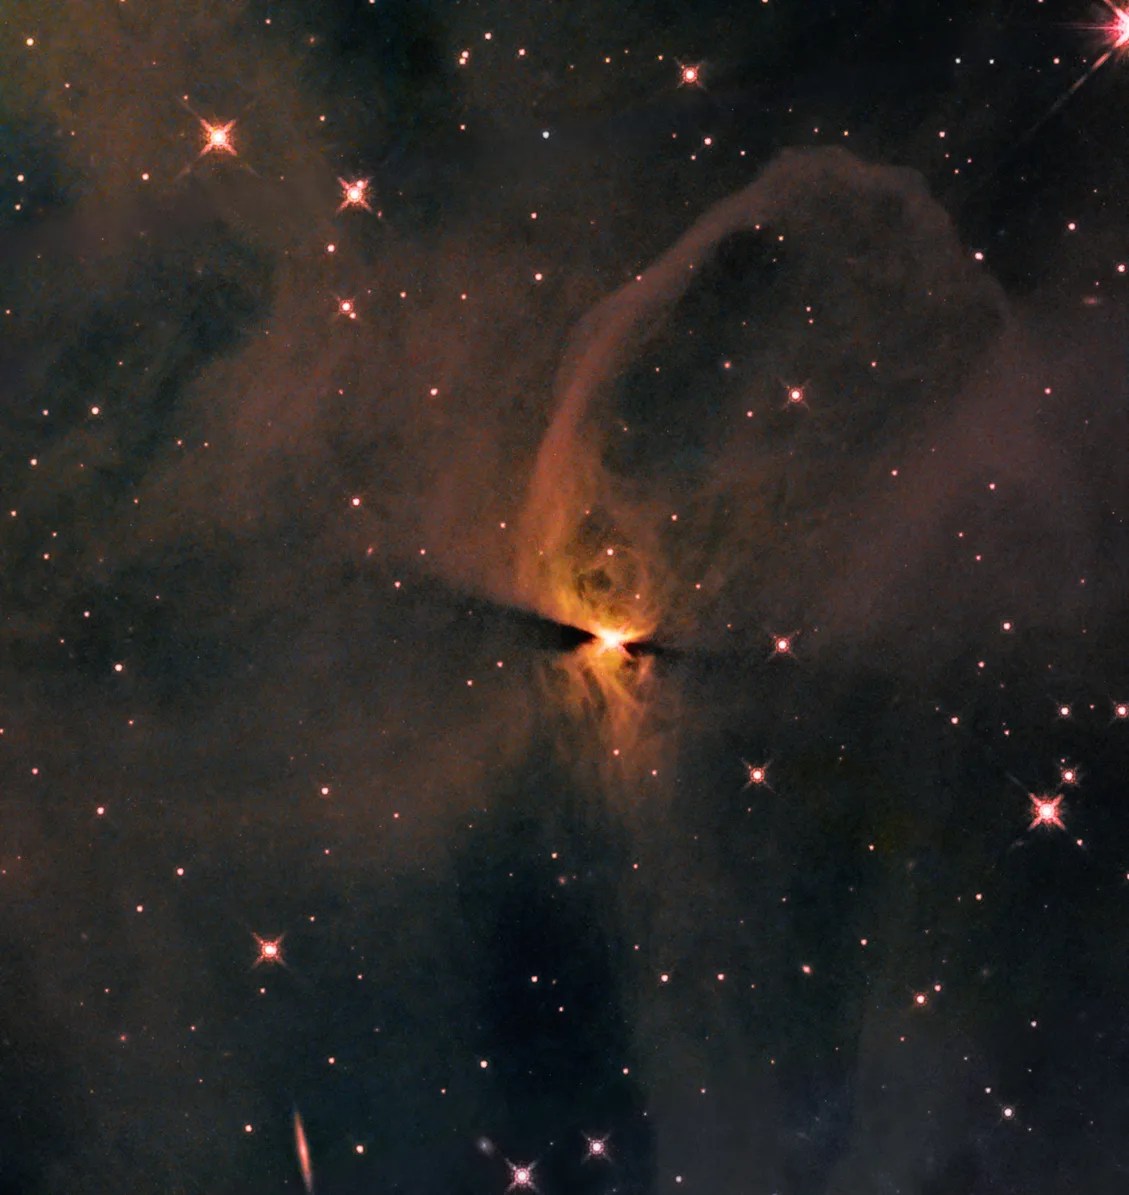 Against a backdrop of stars and distant galaxies, an orange glow of looping clouds emanates from a bright-white central star. dark dust lanes extend from the right and left of the central star.